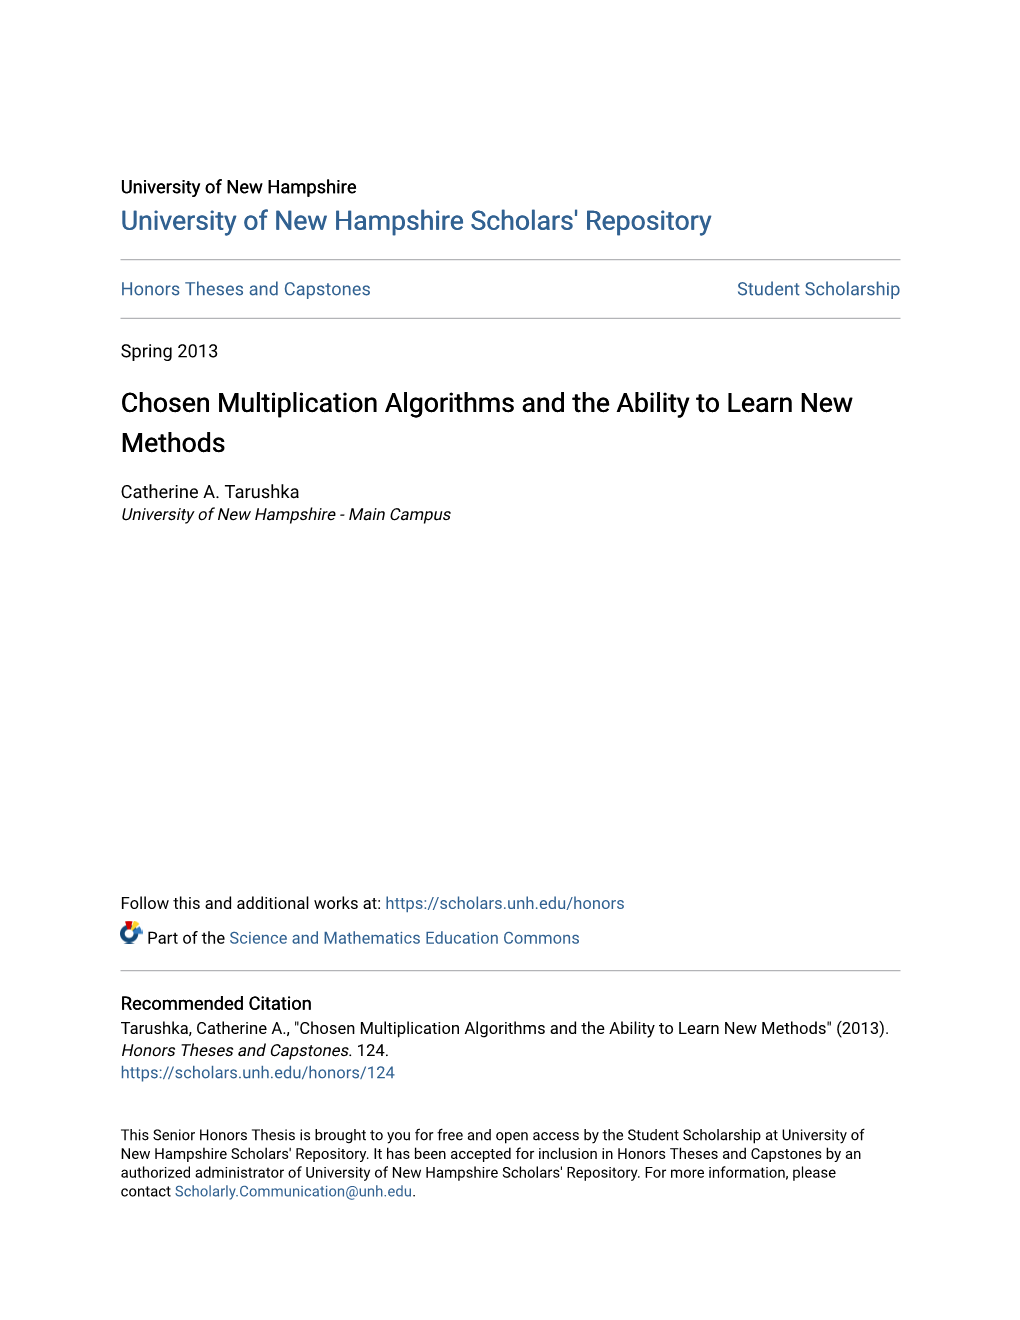 Chosen Multiplication Algorithms and the Ability to Learn New Methods